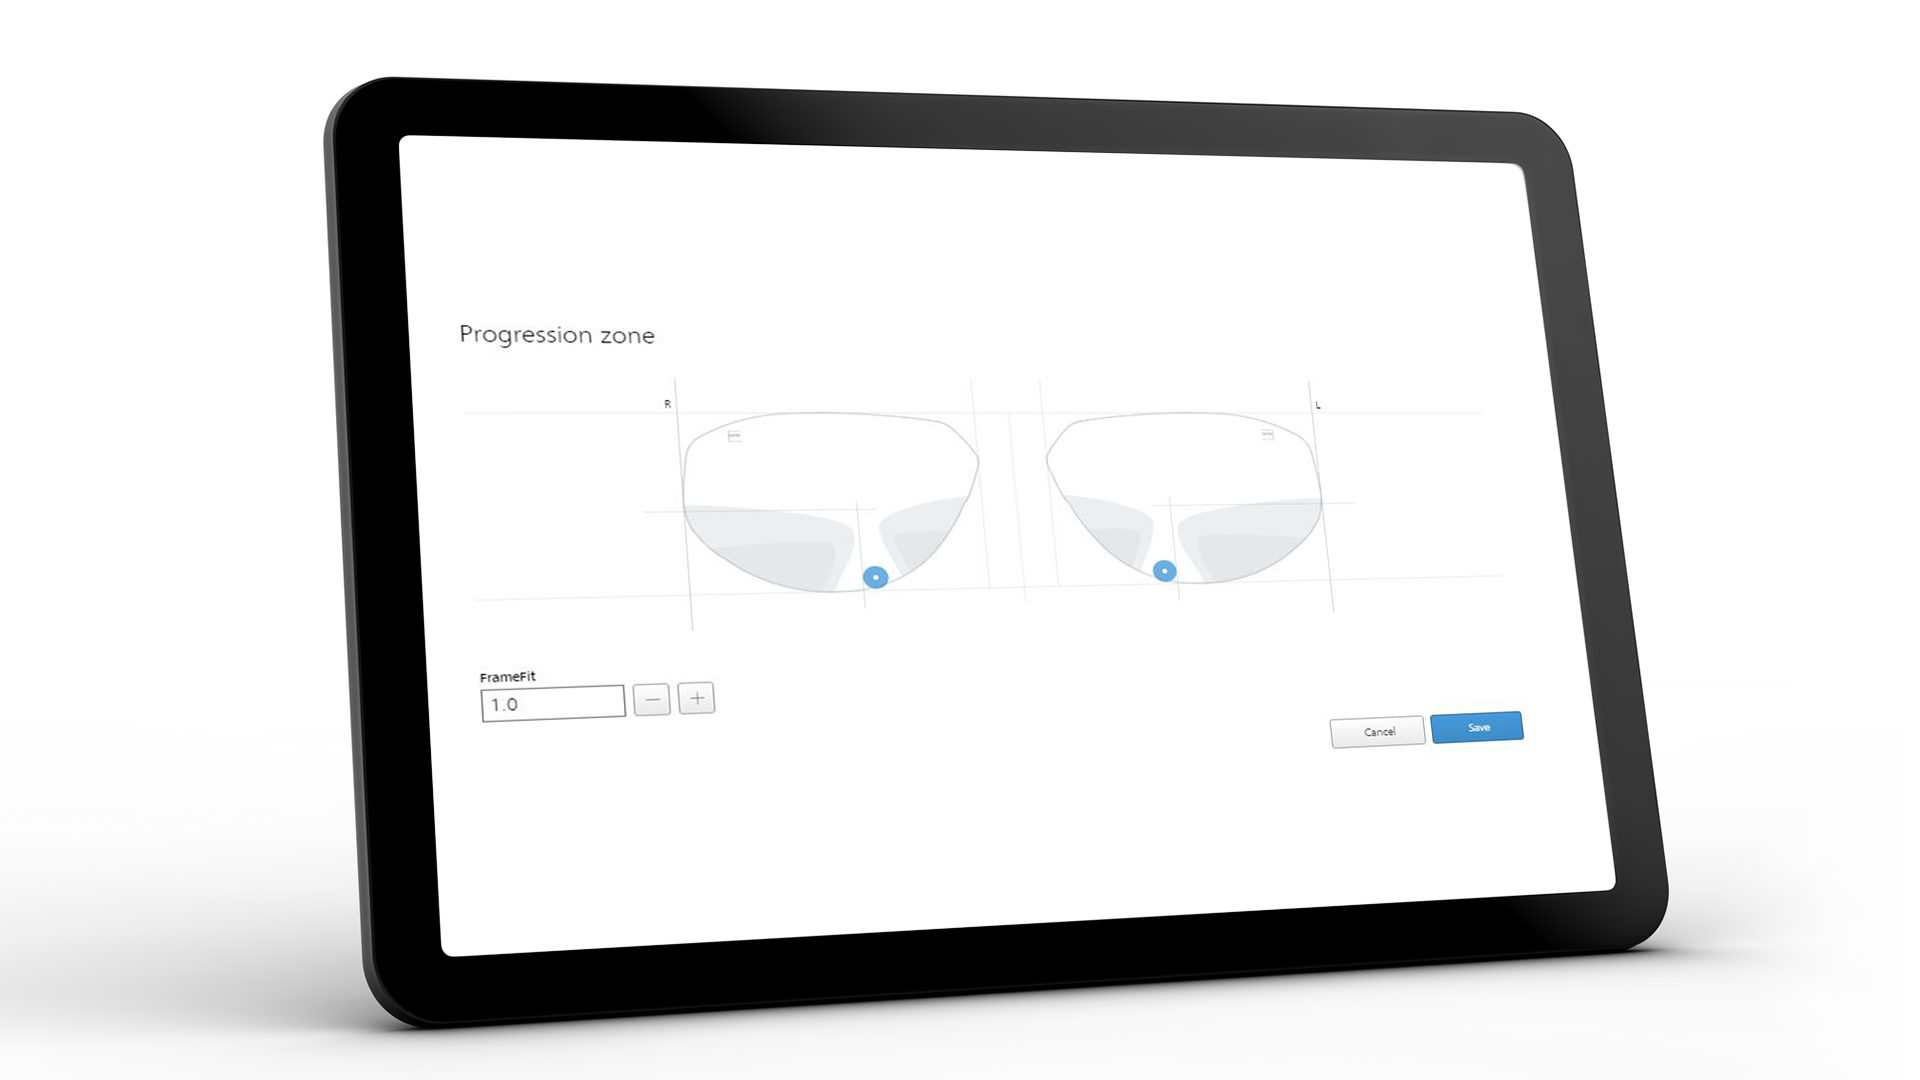 Tablet screen showing the ZEISS VISUSTORE interface for the progression zone 